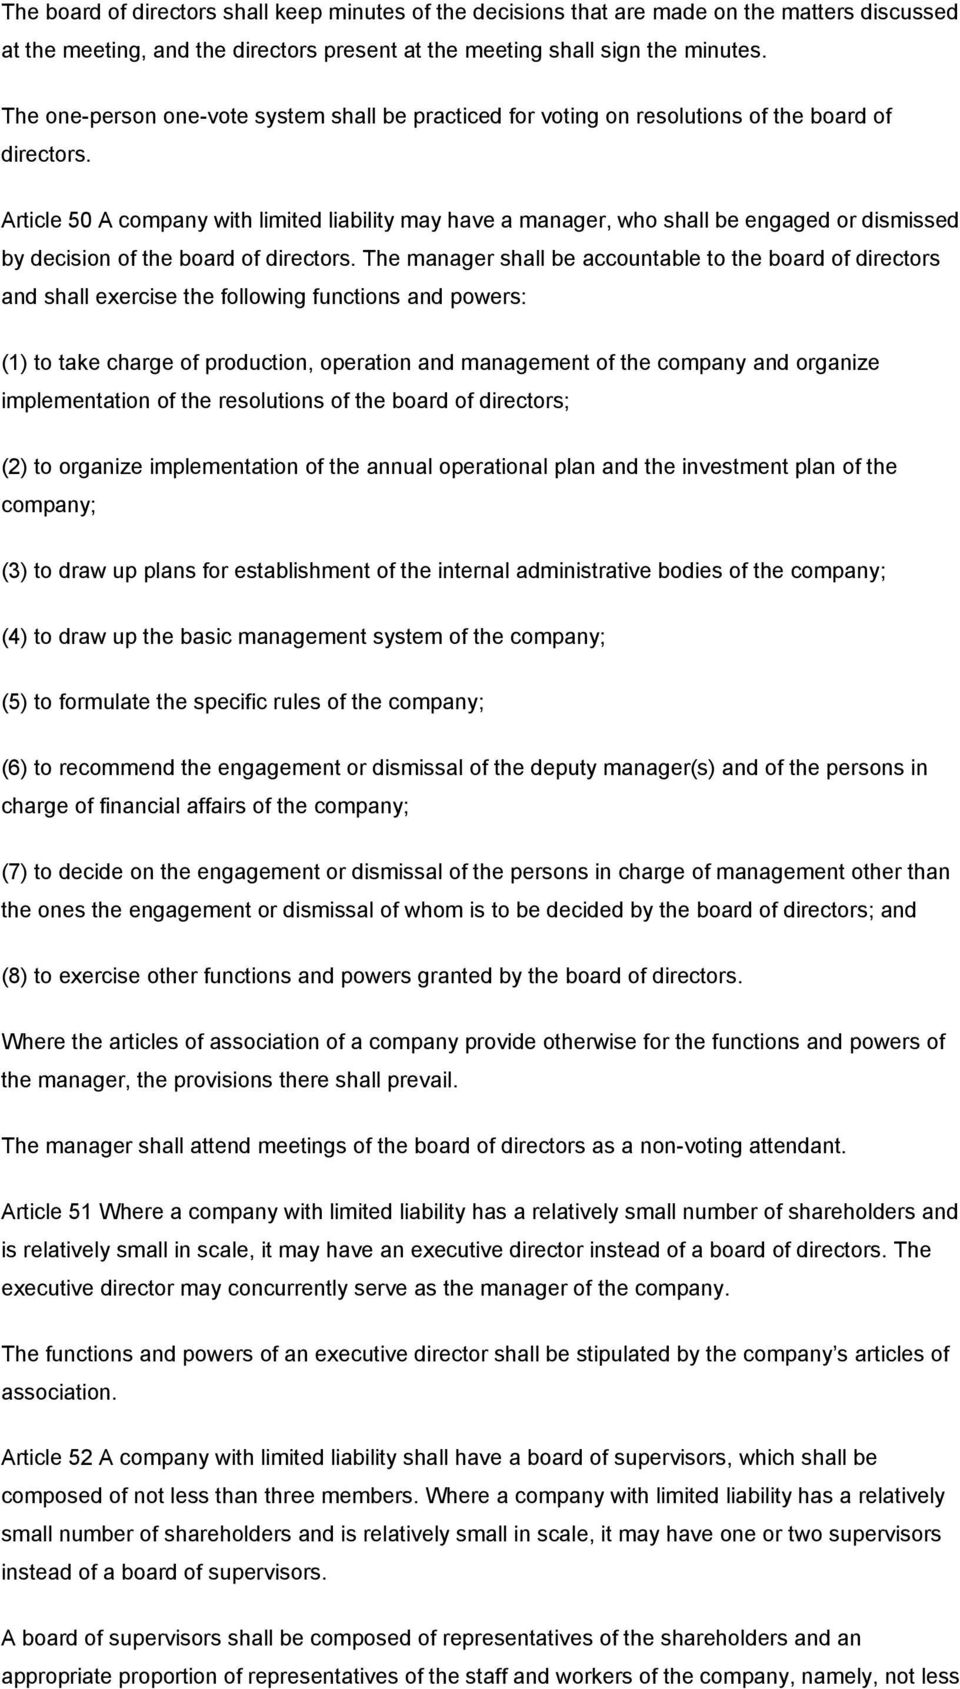 Article 50 A company with limited liability may have a manager, who shall be engaged or dismissed by decision of the board of directors.